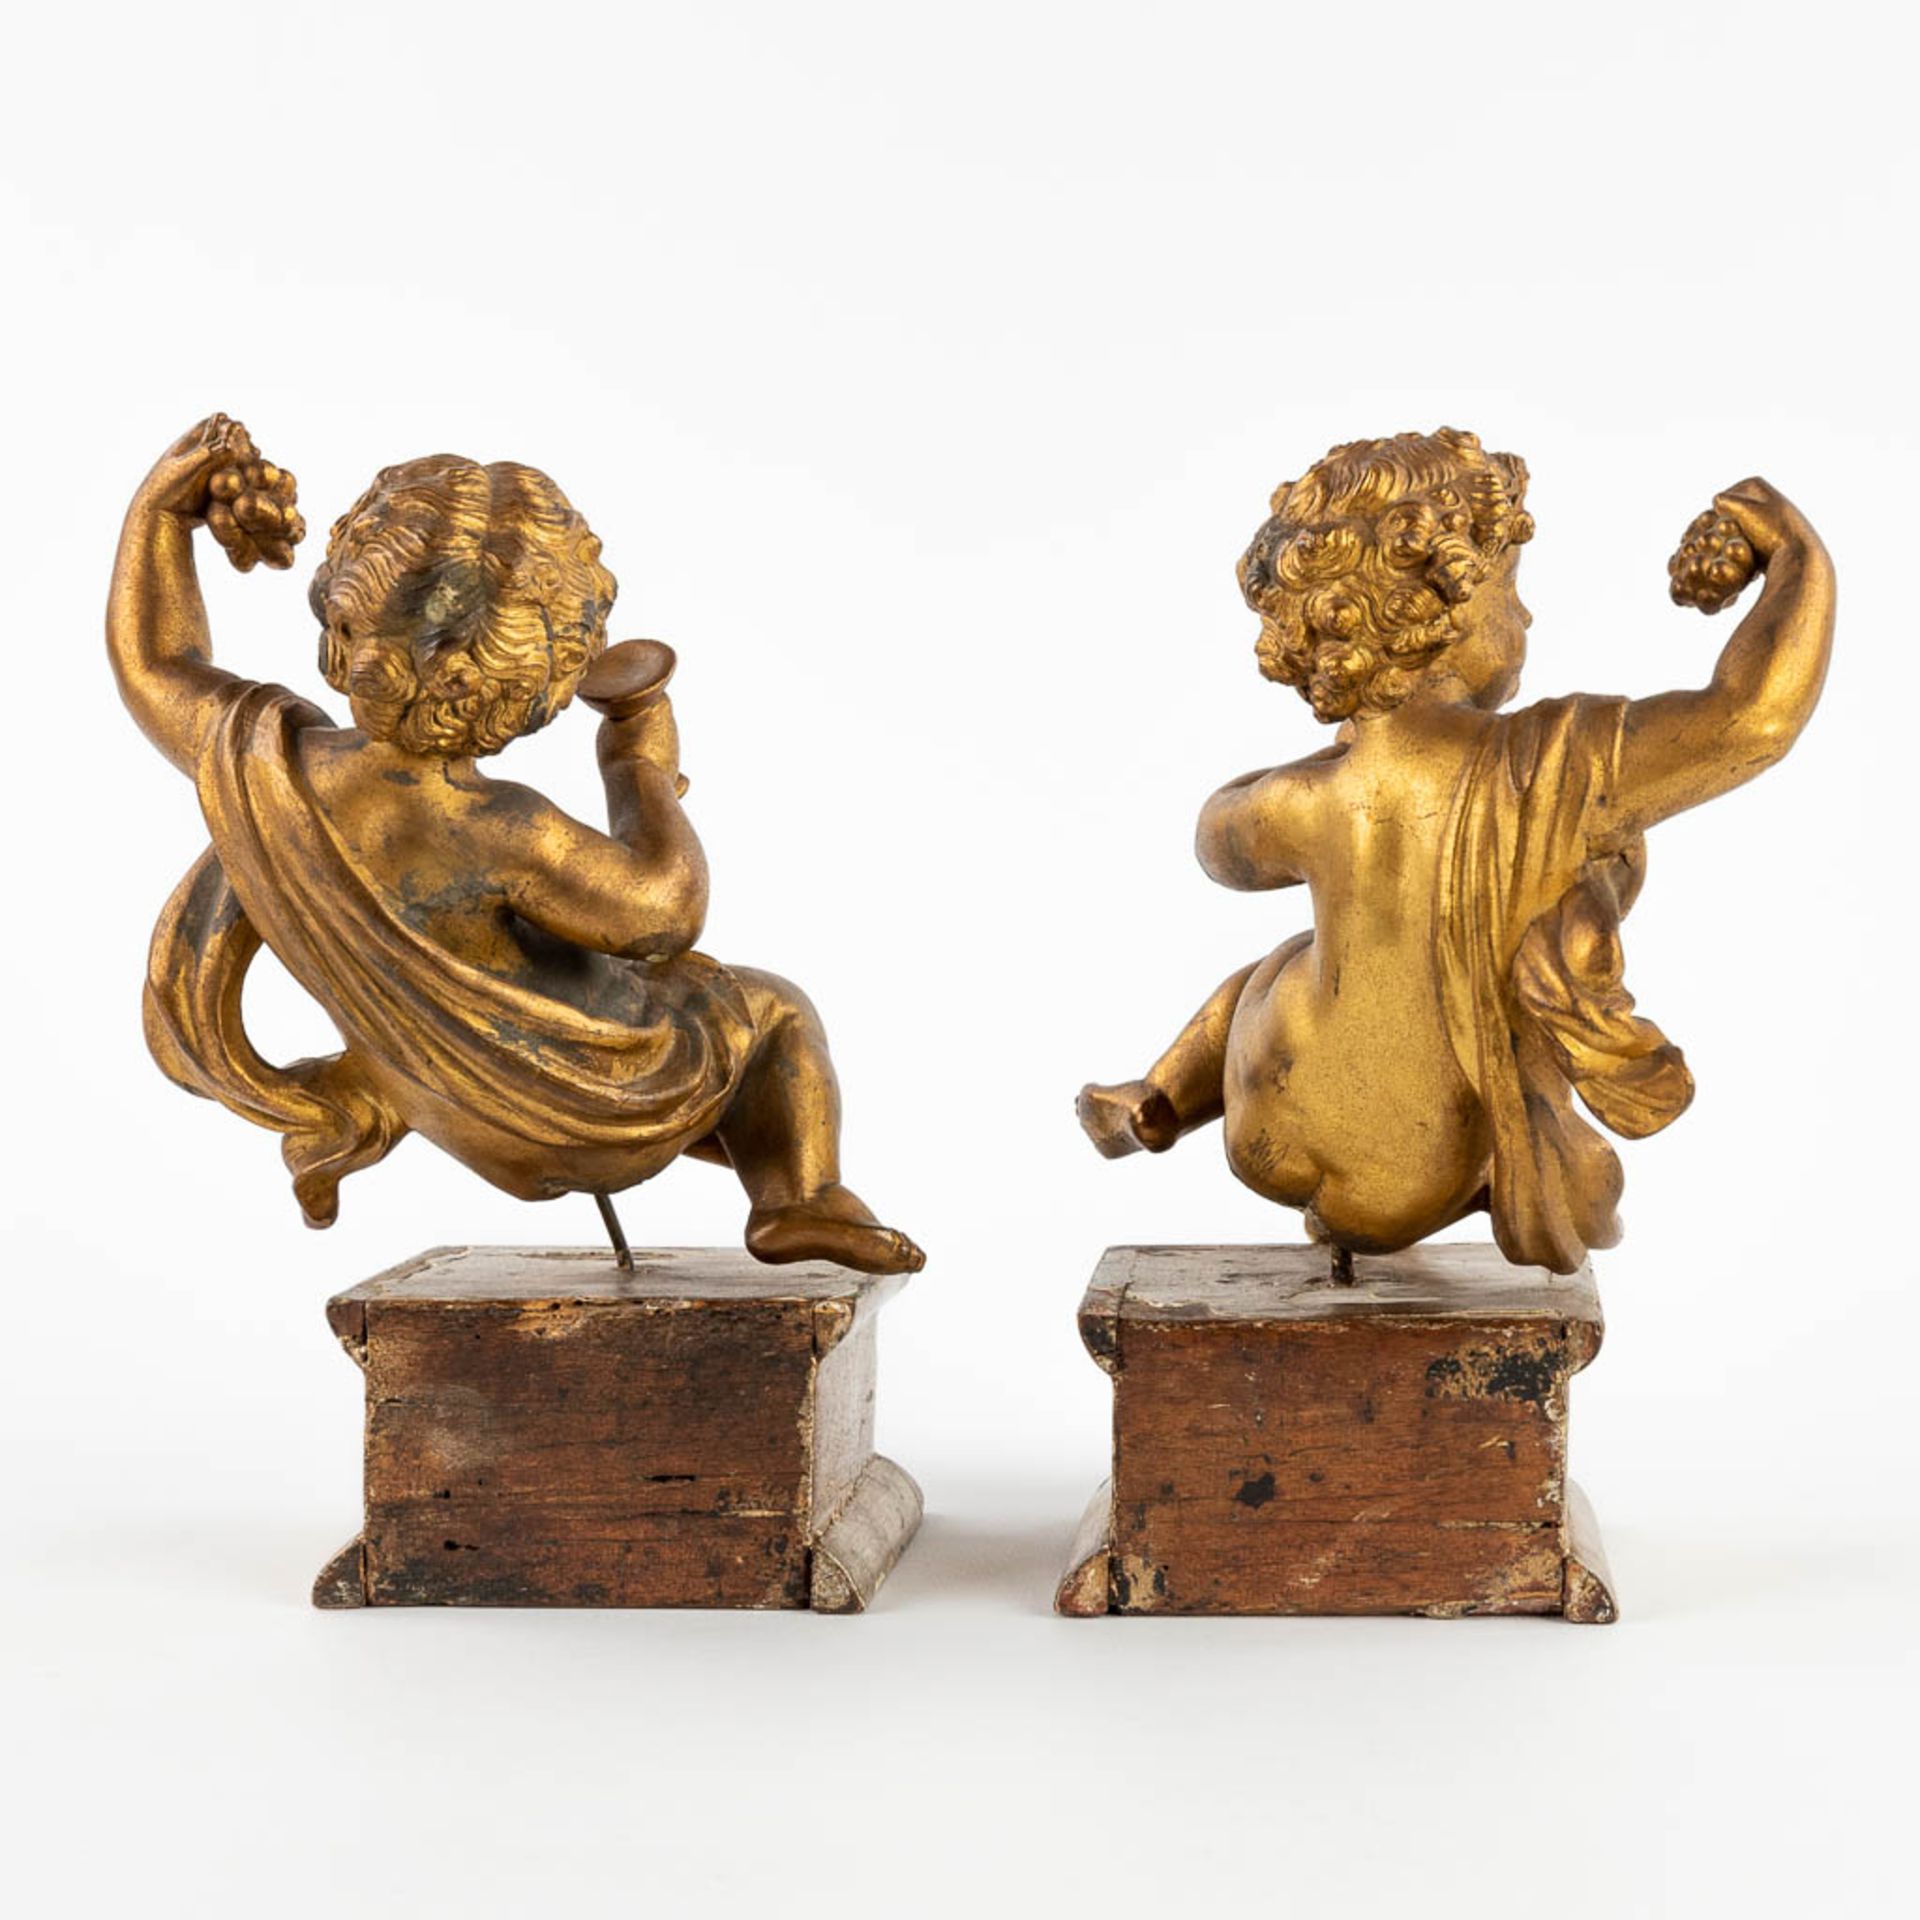 A pair of angels, gilt spelter and mounted on a wood base. 19th C. (W:12 x H:18 cm) - Image 5 of 14